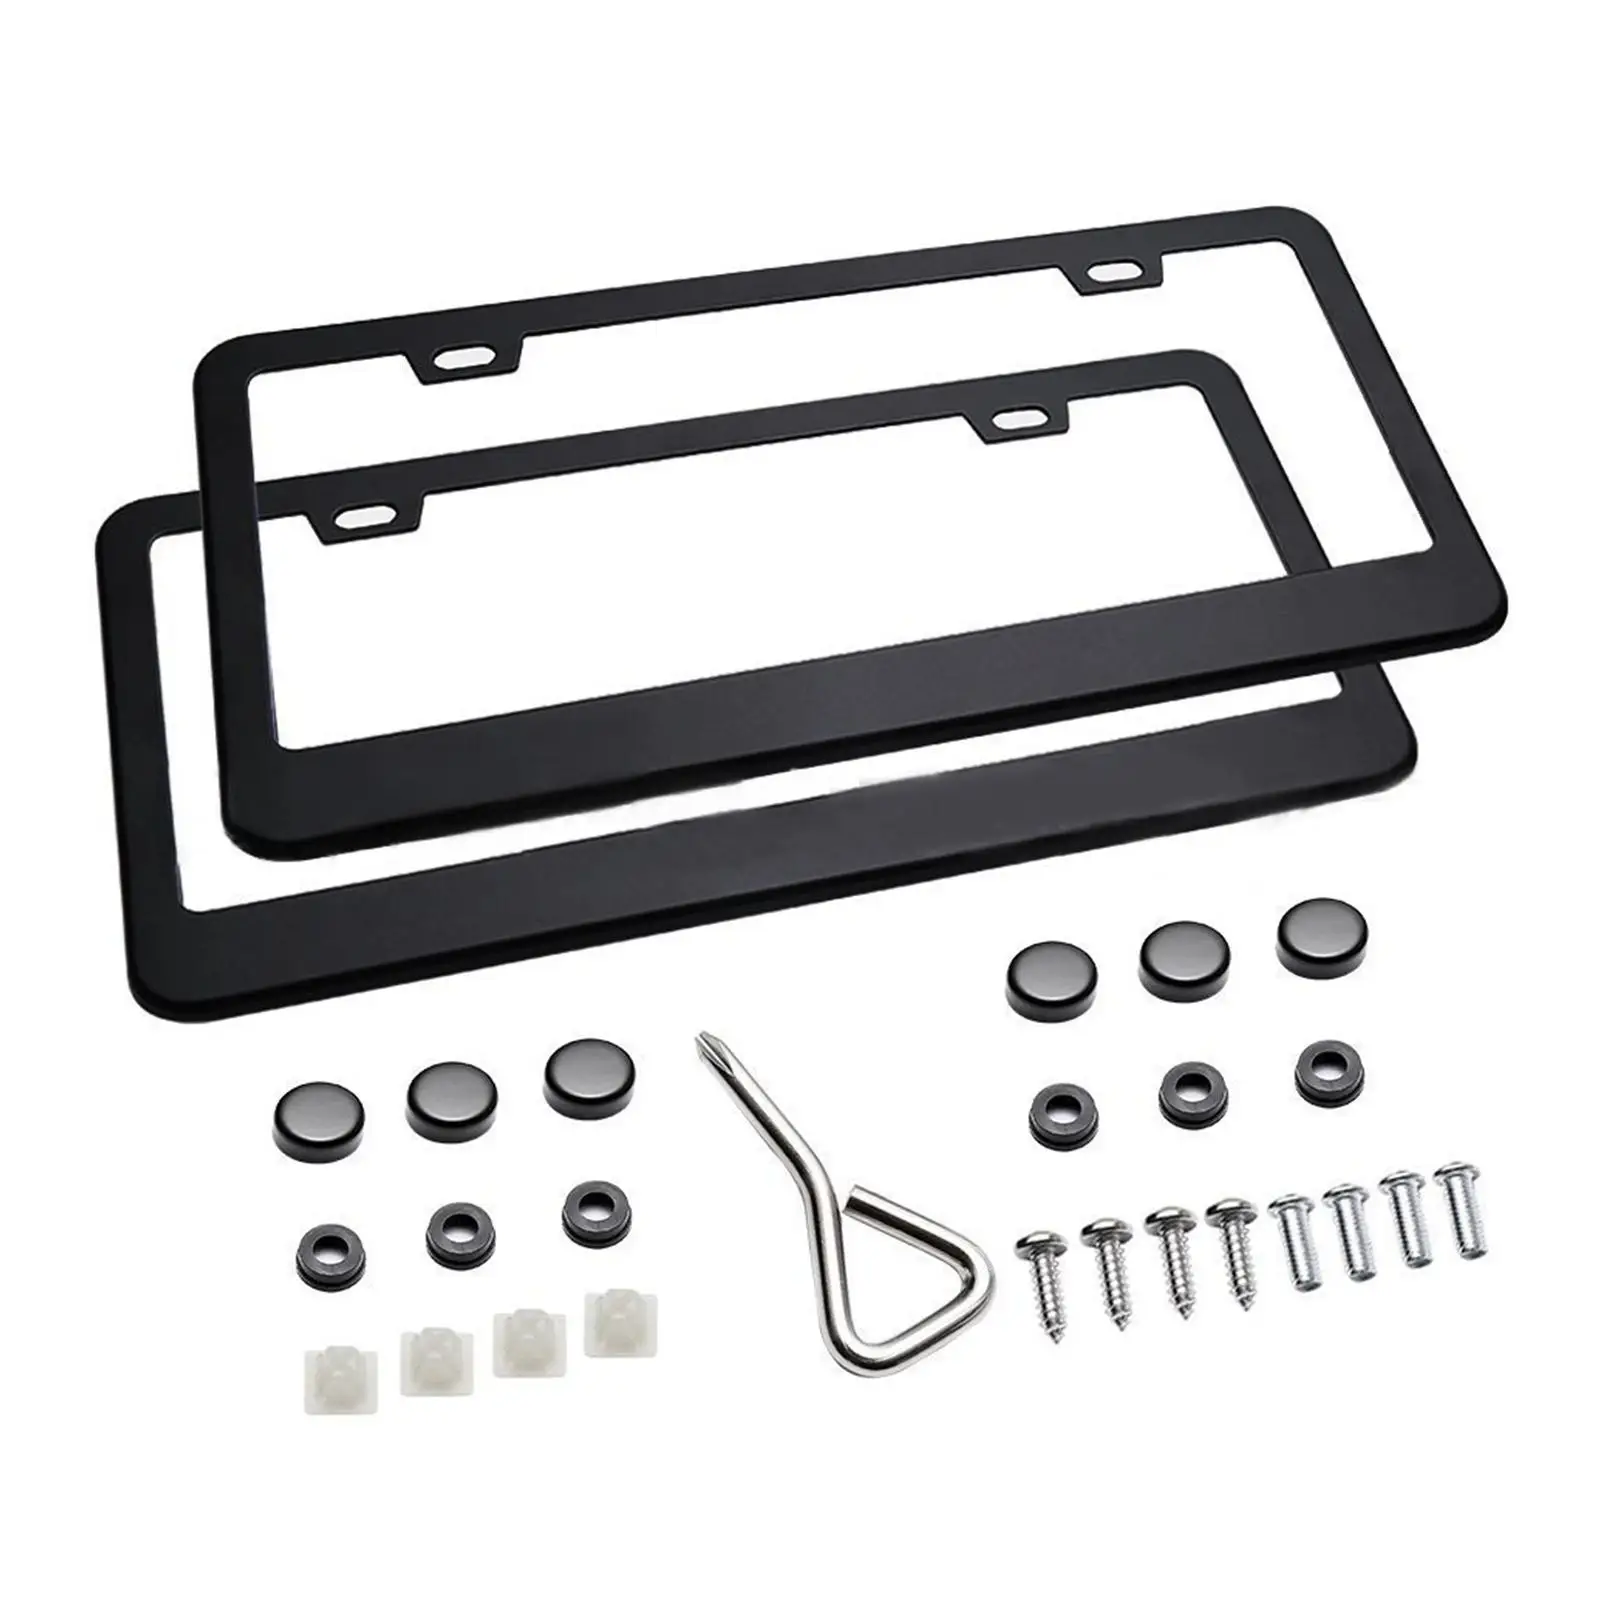 2 Pieces License Plate Mounting Frames Auto Accessories Protective Easy to Install Universal US Vehicles License Plate Holder